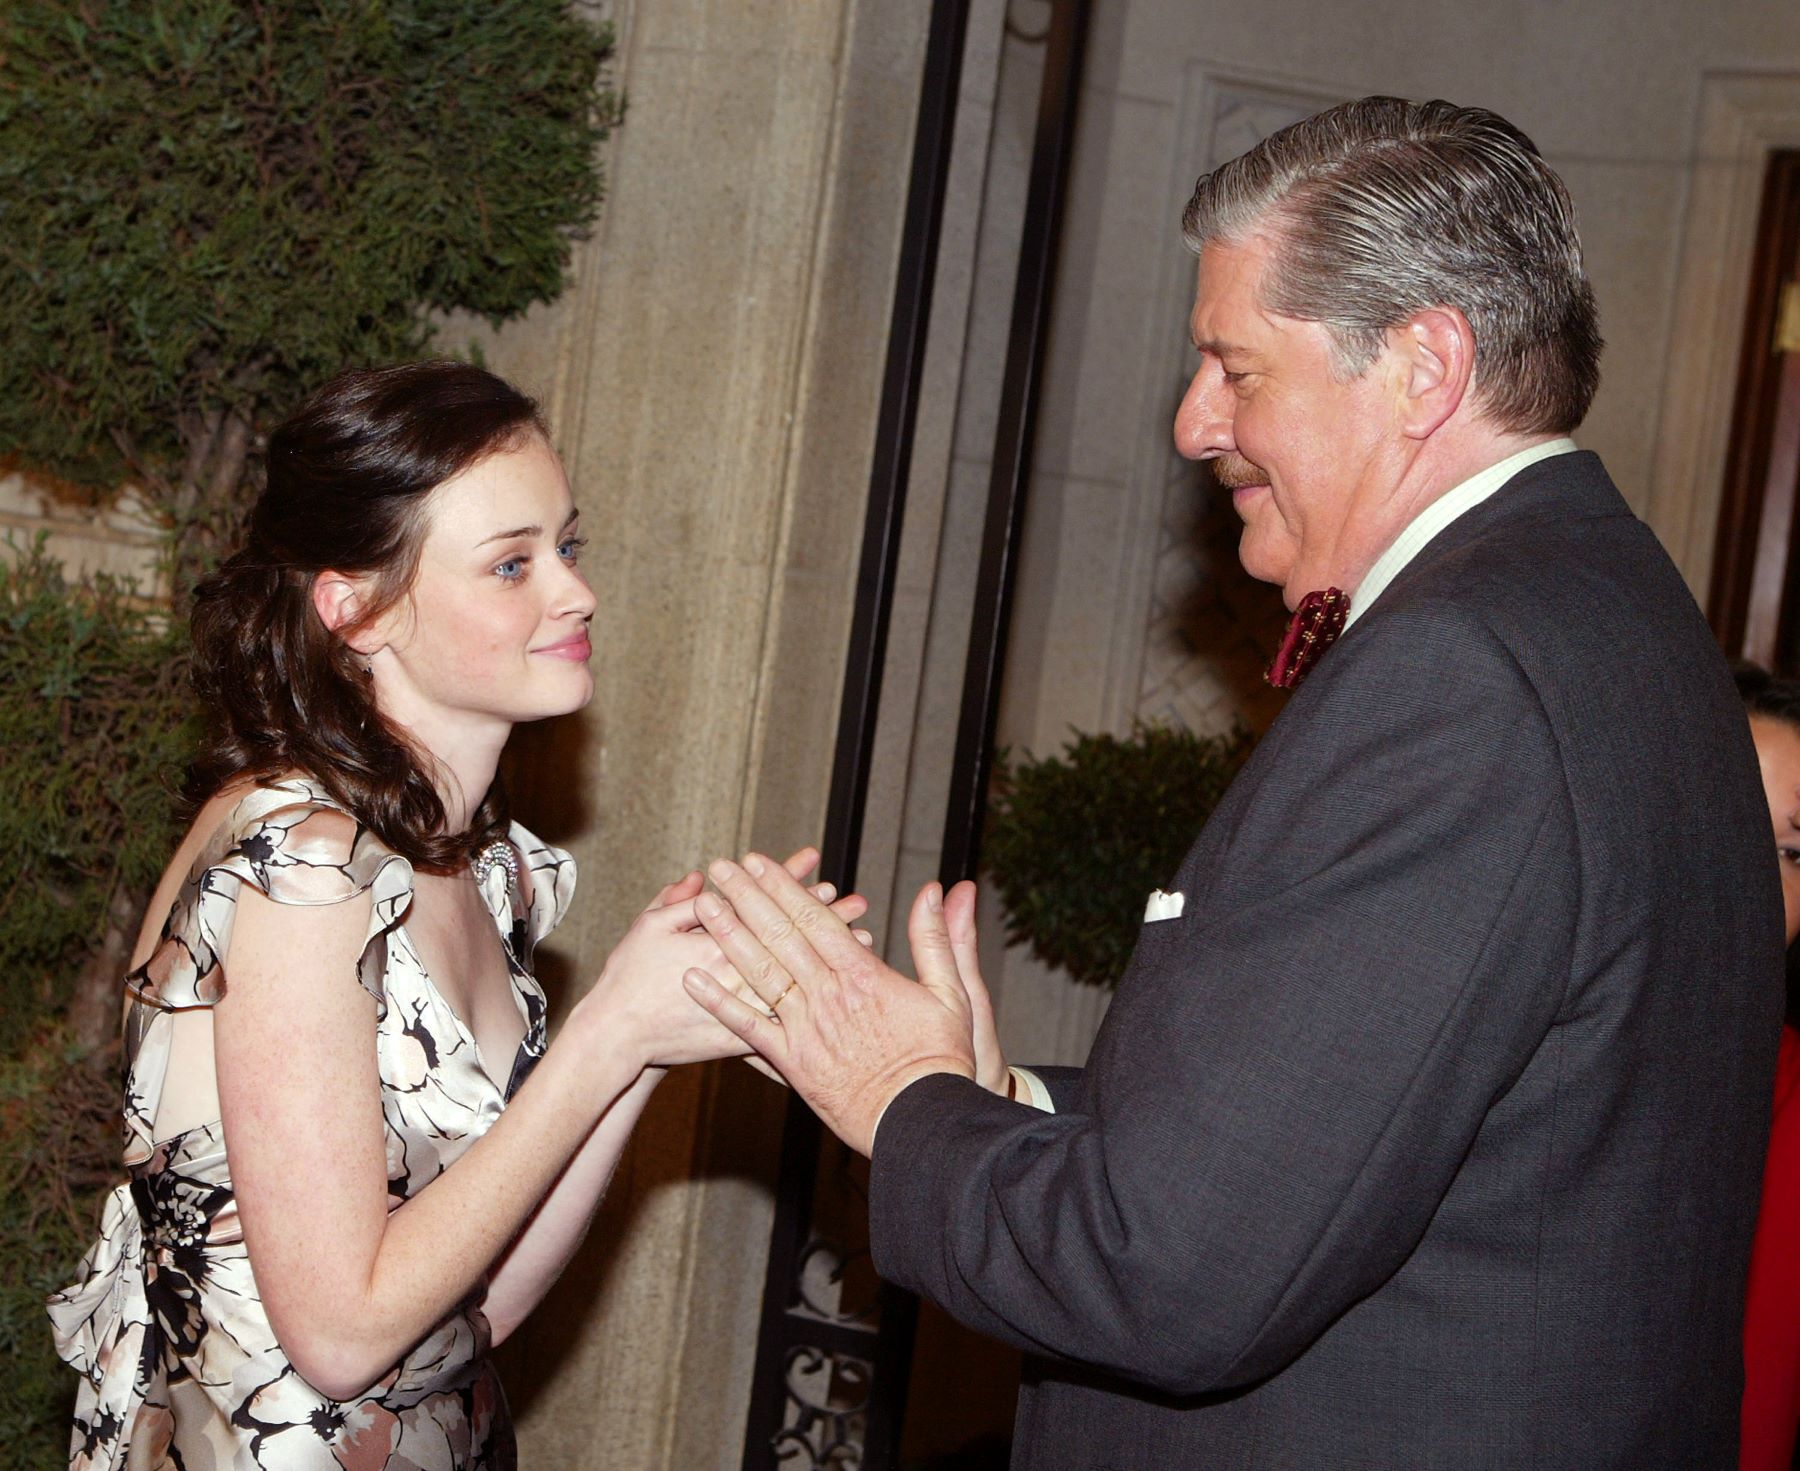 Alexis Bledel, who plays Rory, and Edward Herrmann, who plays Richard, of 'Gilmore Girls'